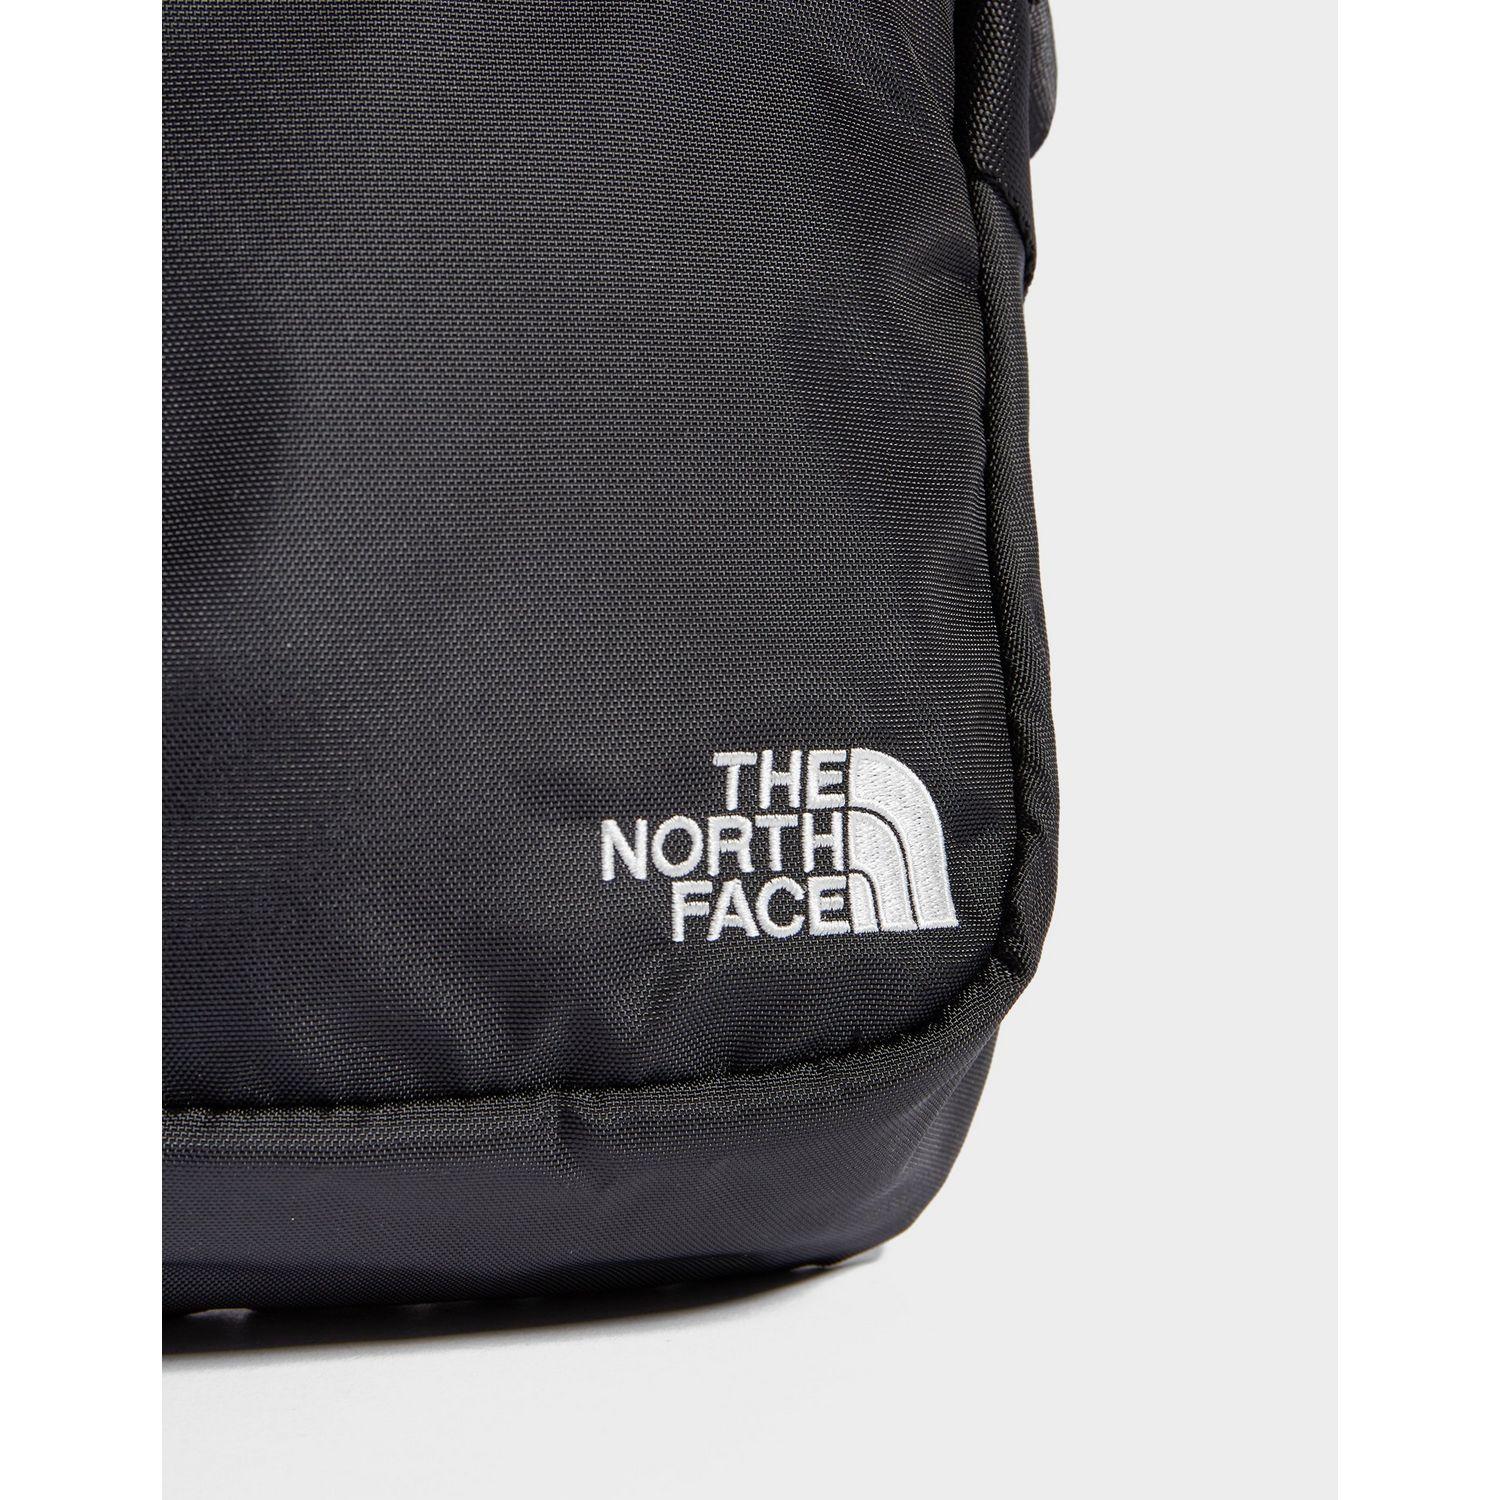 The North Face Synthetic Convertible Crossbody Bag in Black/White (Black) for Men - Lyst